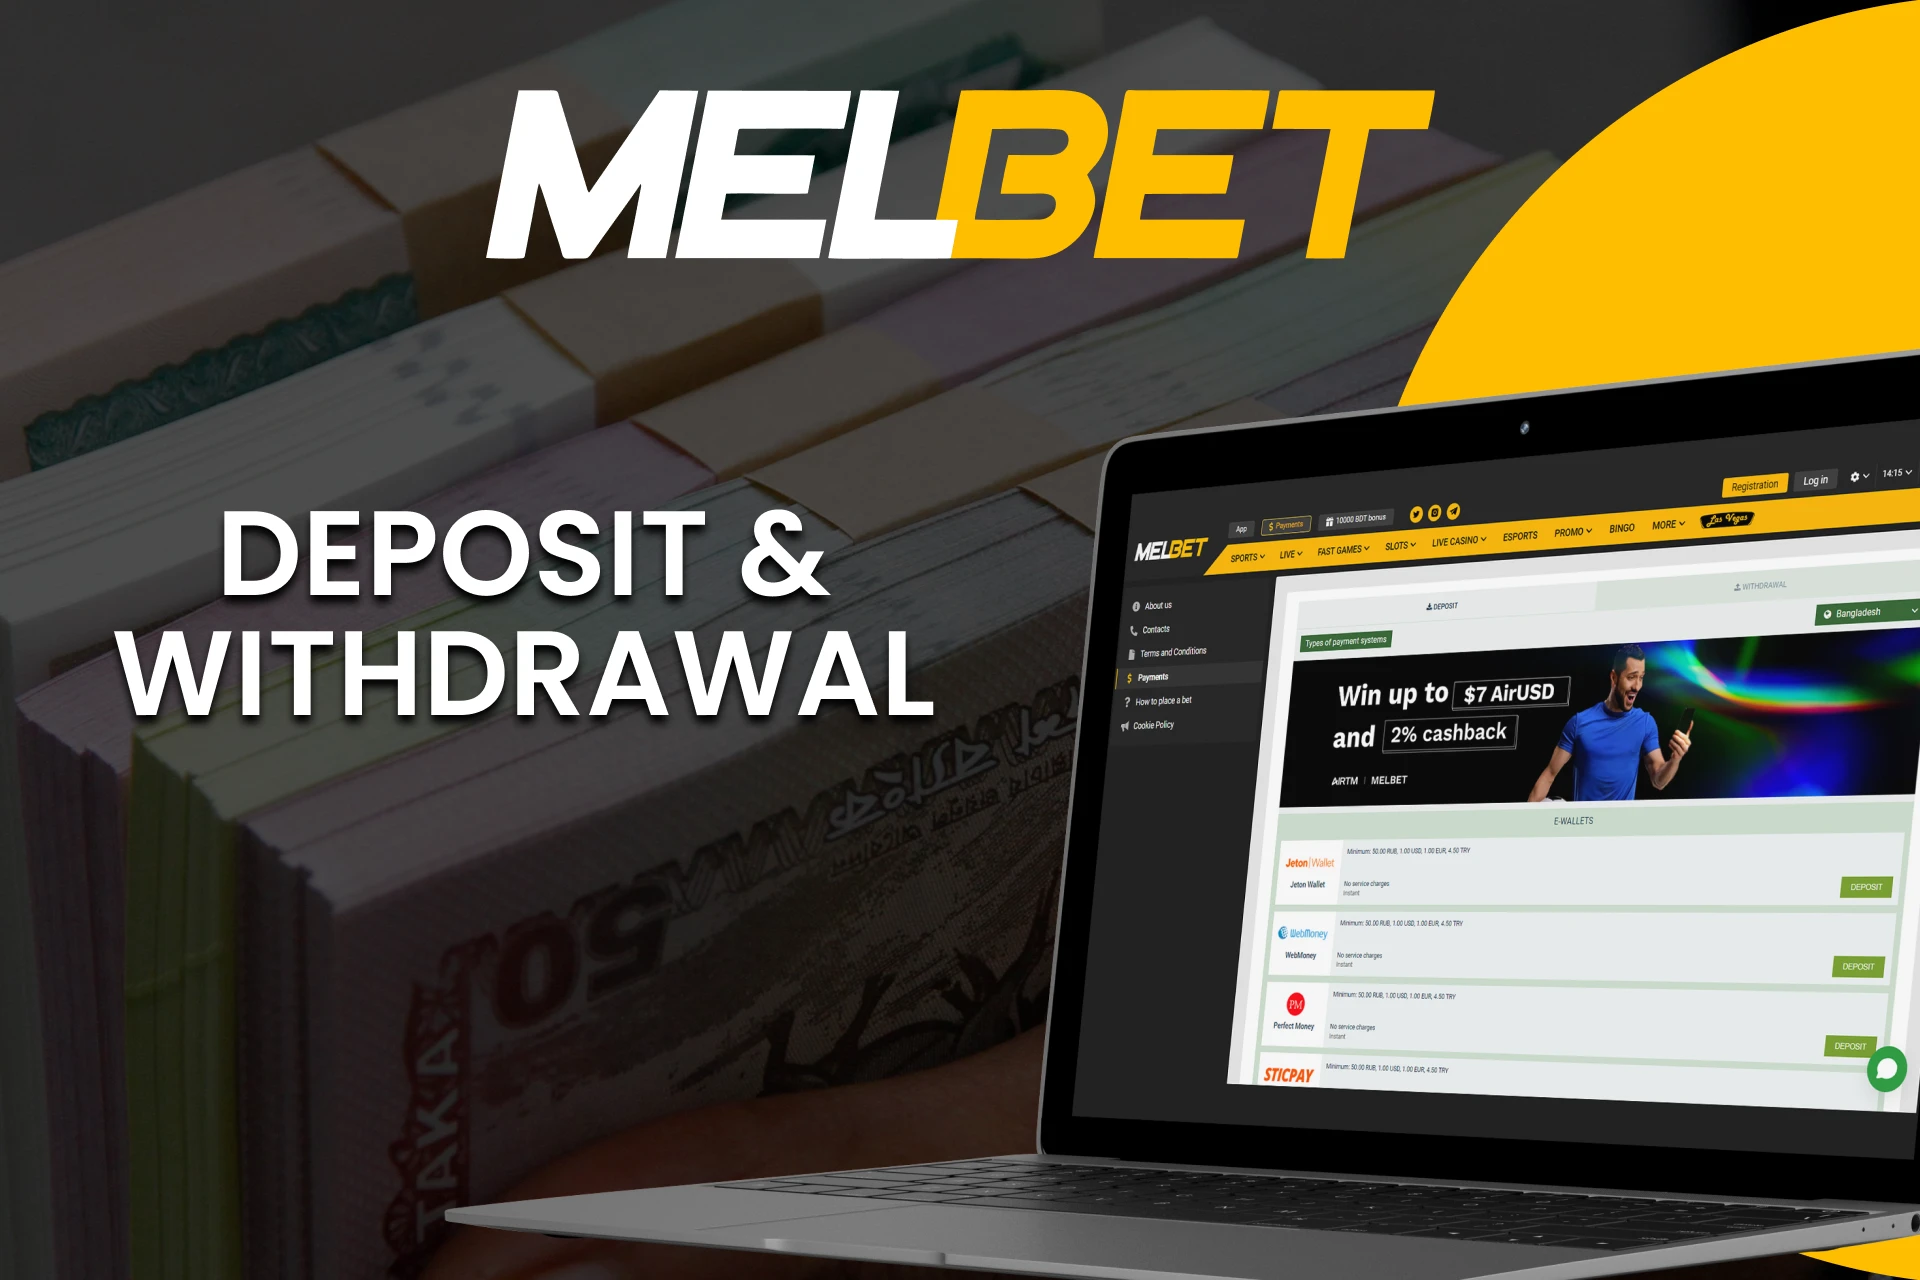 Find out about withdrawal and deposit methods on Melbet.